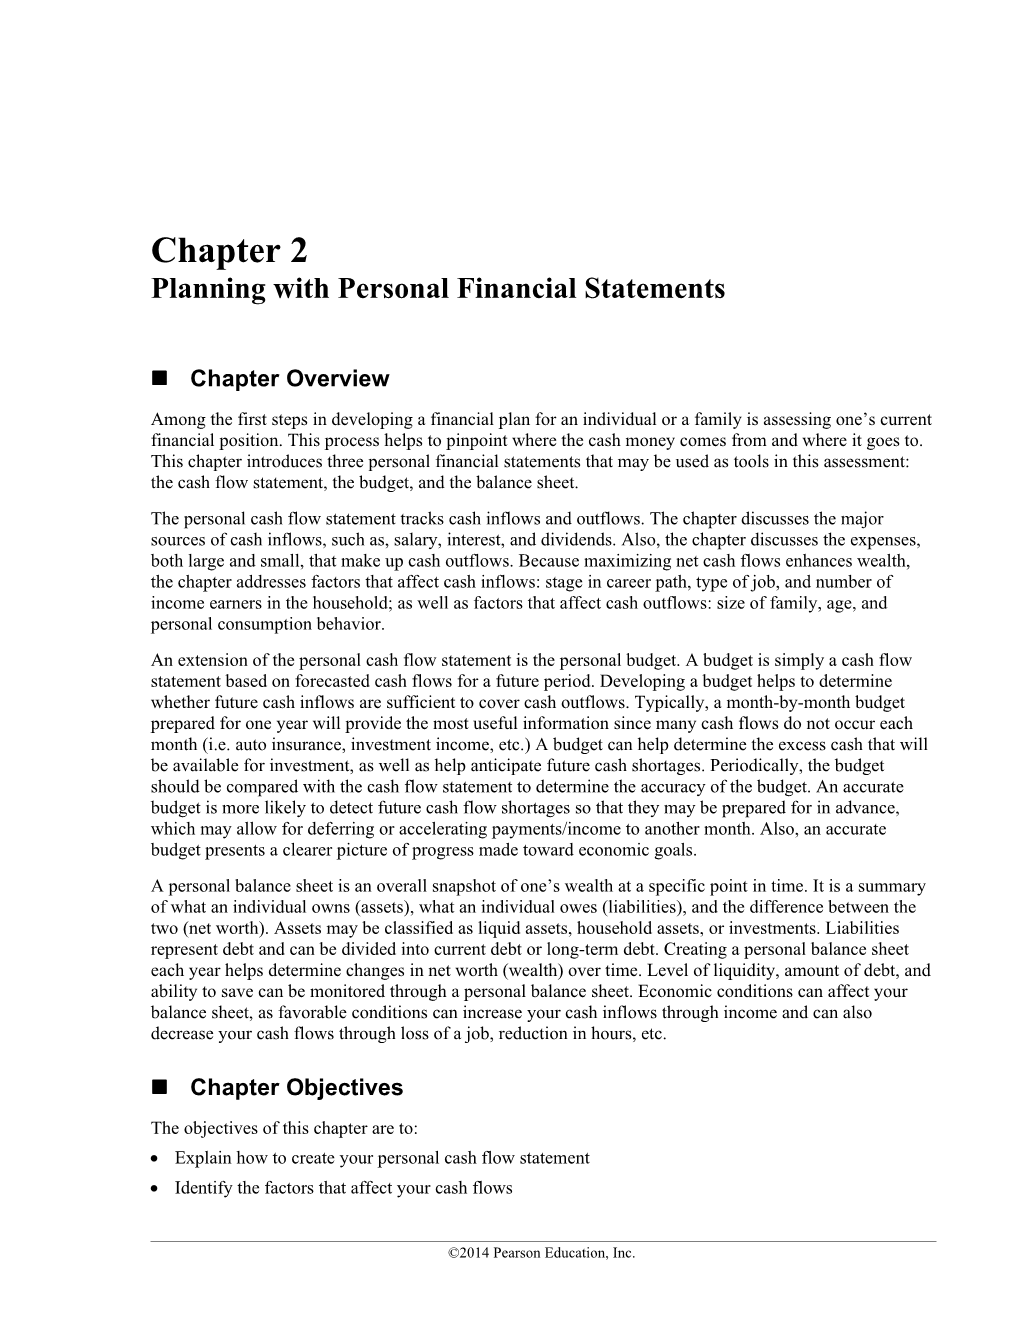 Chapter 2 Planning with Personal Financial Statements